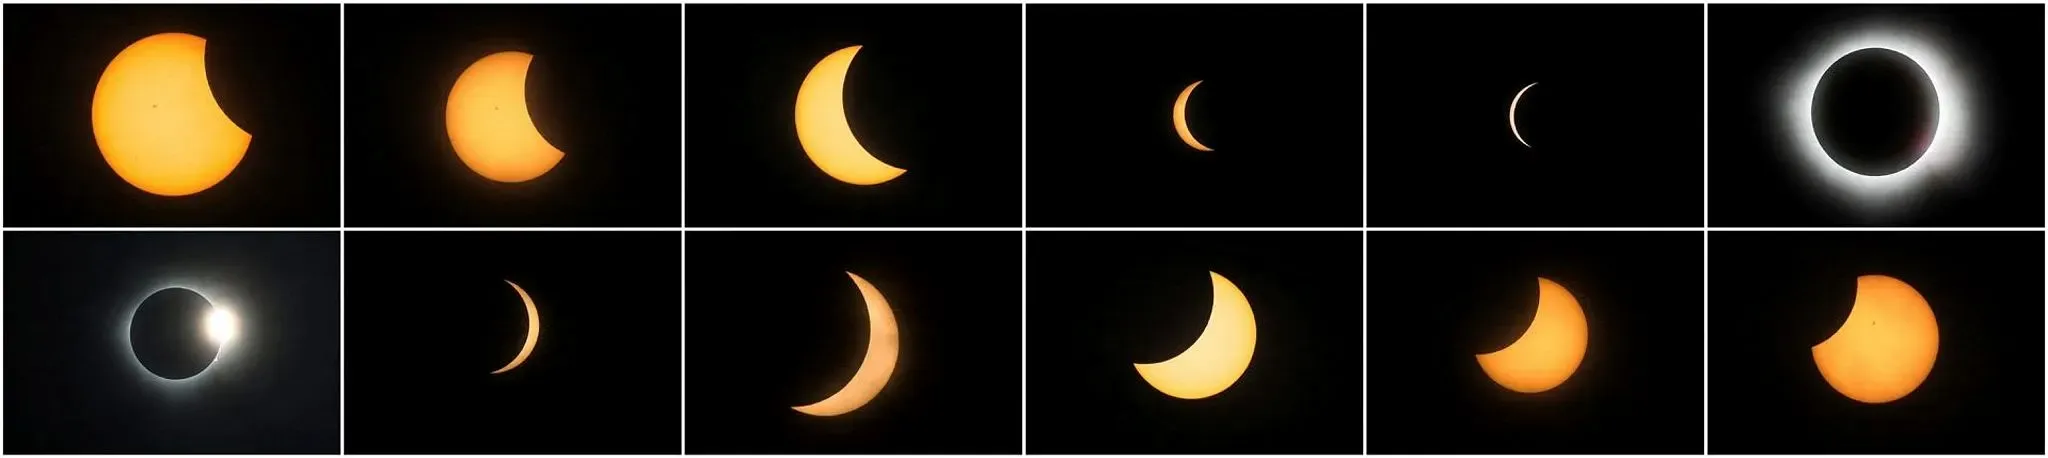 Eclipses-phases-3-20240409.webp